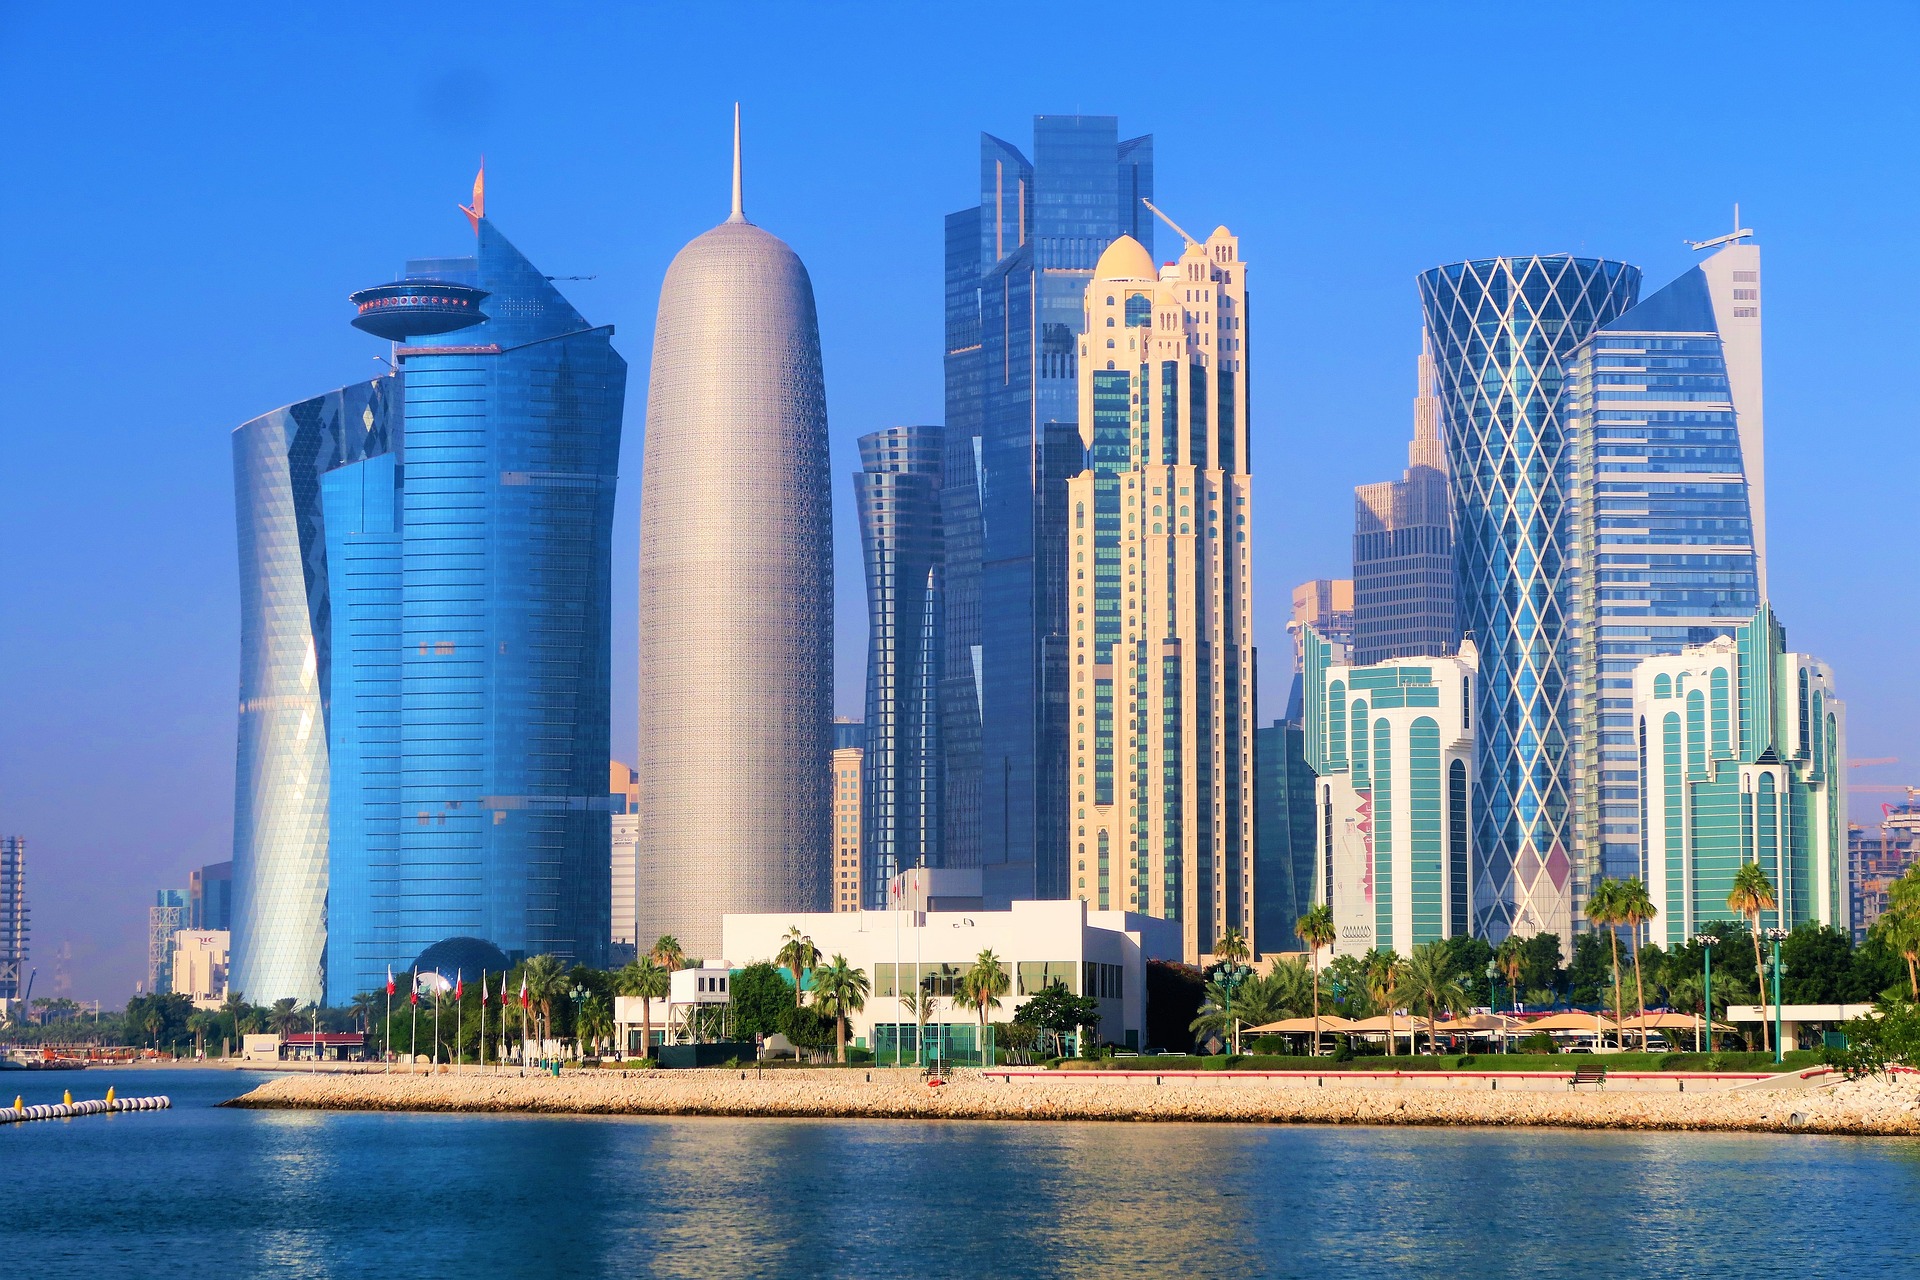 EVERYTHING YOU NEED TO KNOW ABOUT DOHA: FROM A FISHING VILLAGE TO A WORLD METROPOLIS